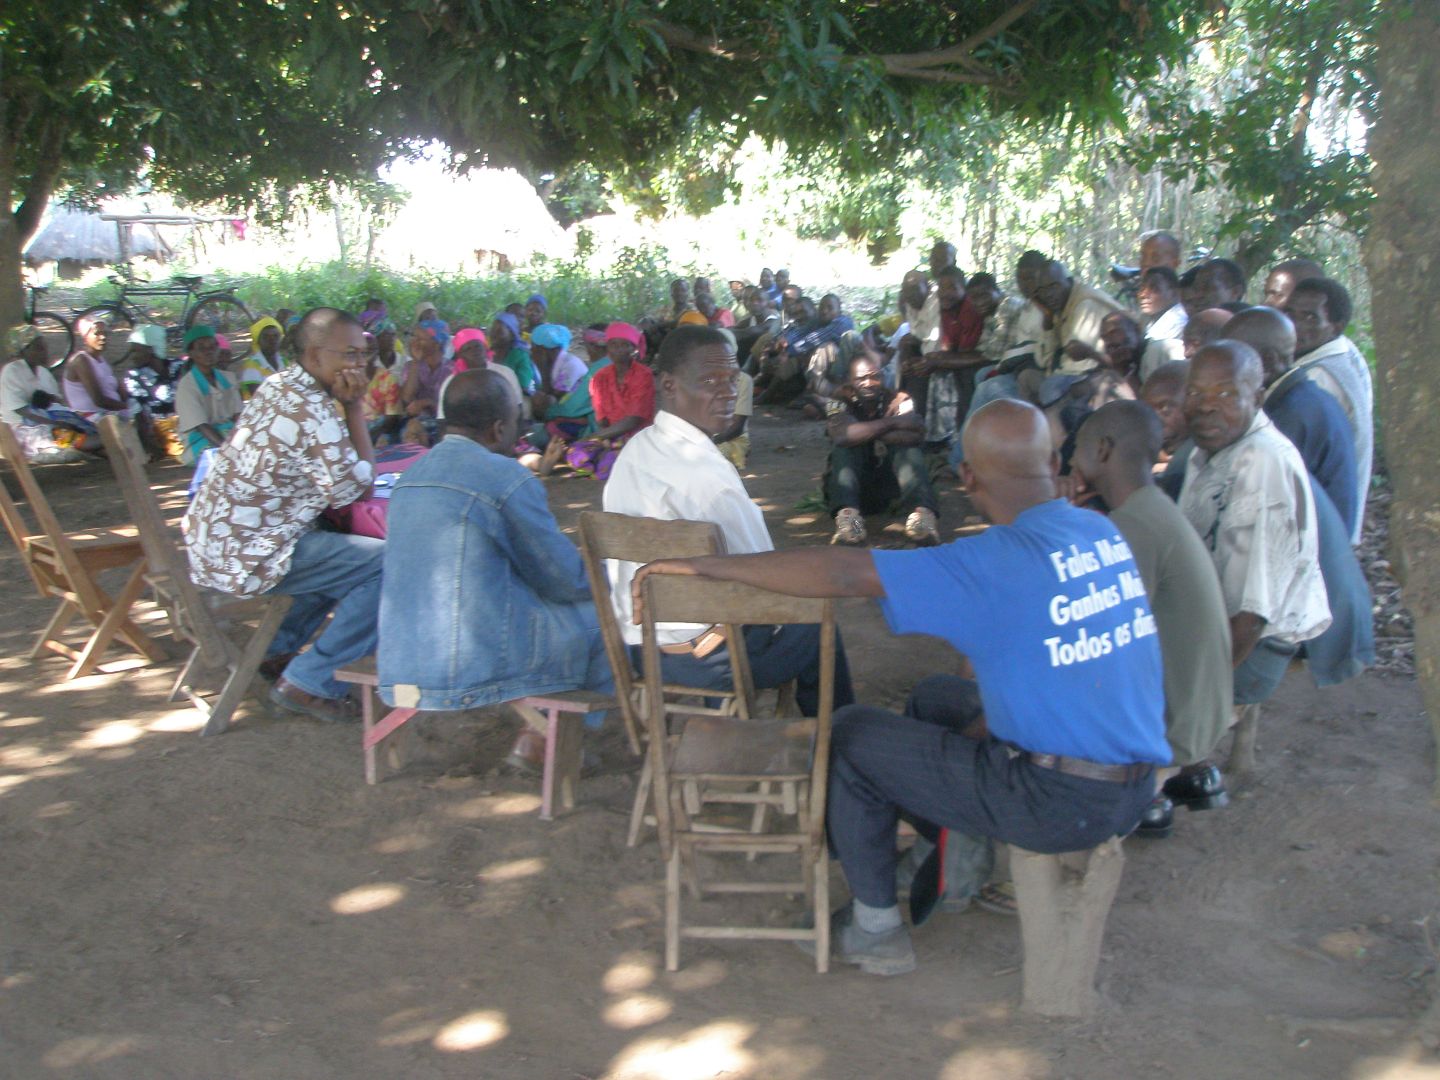 A group of Mozambique residents sit in chairs outside in a circle engaged in discussion.